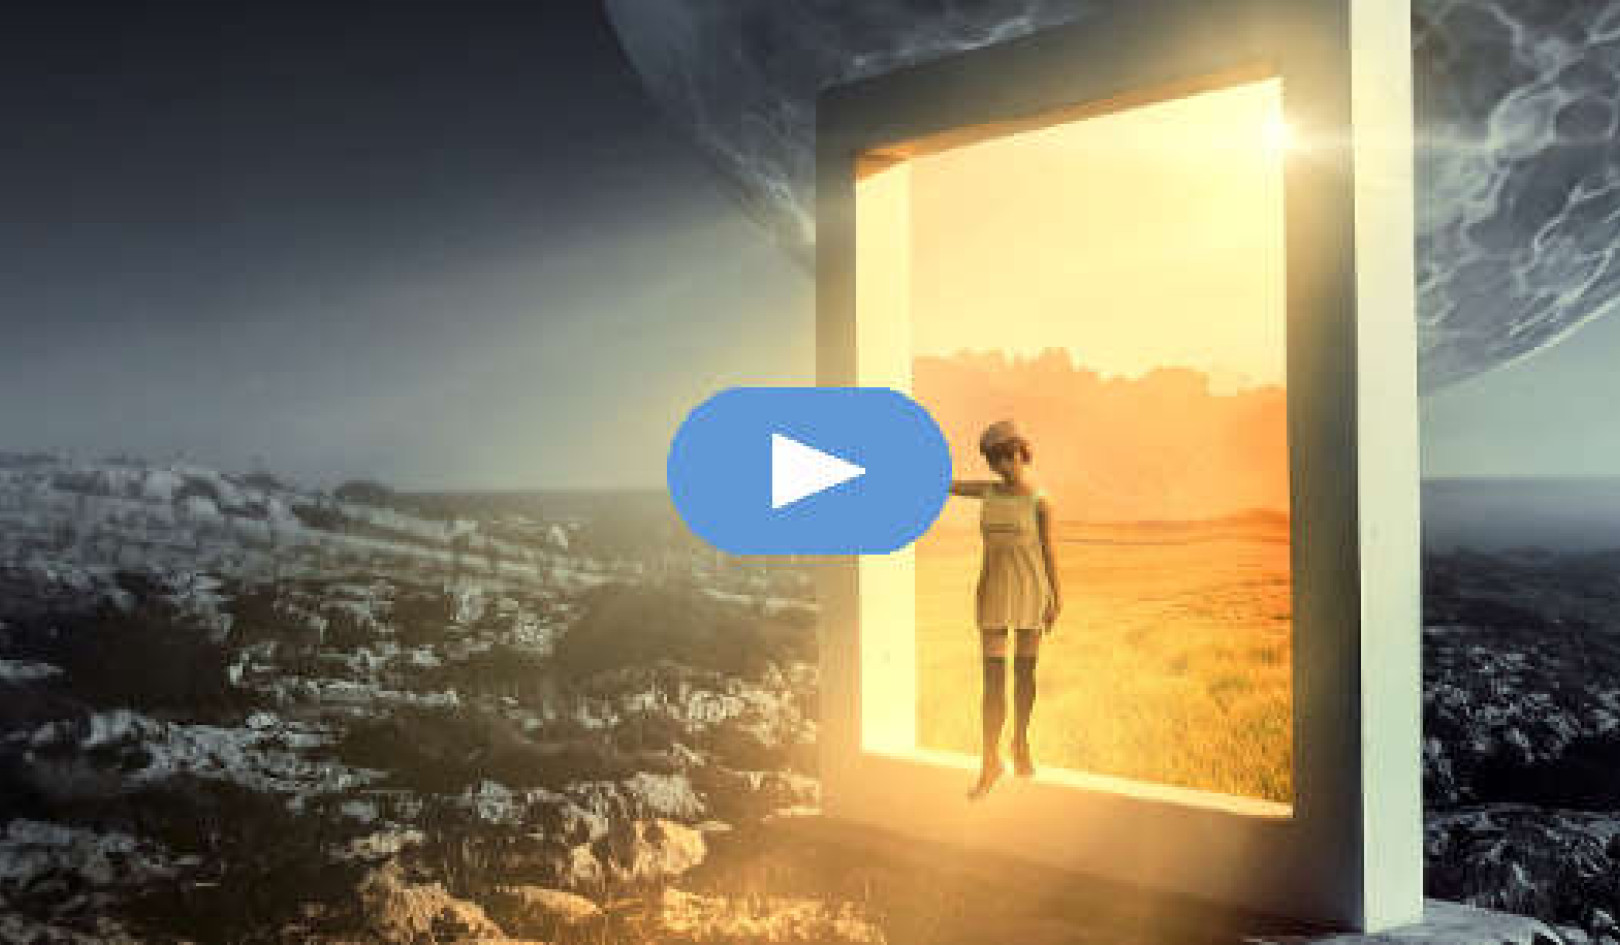 How to Make Spiritual Contact with The Other Side (Video)